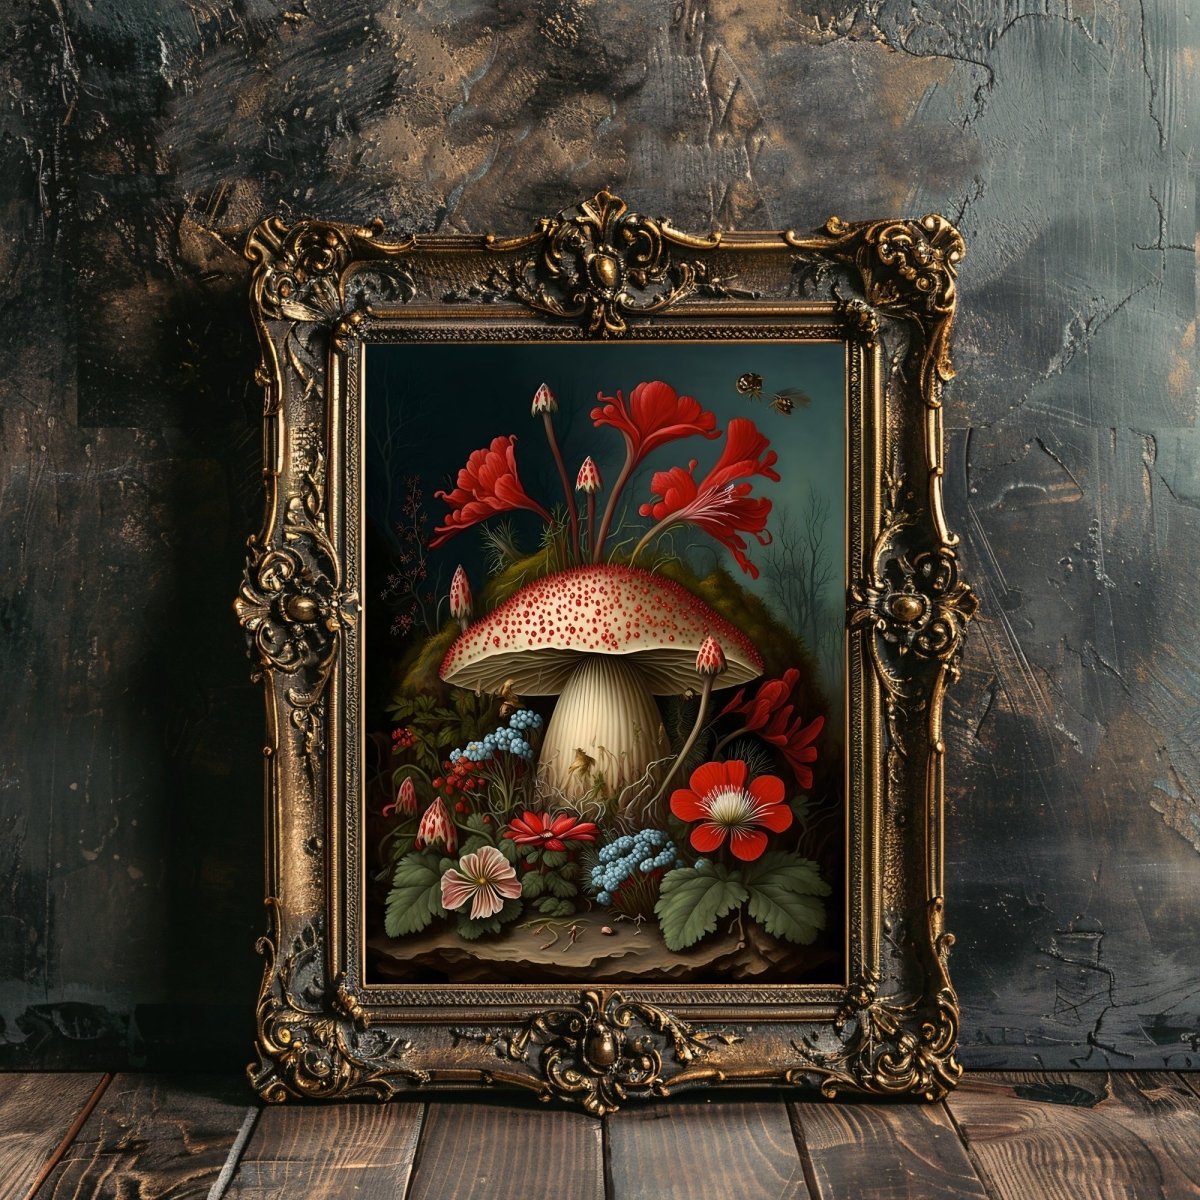 Mushrooms and Flowers in Woodland Gothic Wall Art, Dark Academia, Goblincore, Botanical Decor, Witchy Gothic Cottagecore, Mushroom Art Paper Poster Prints - Everything Pixel